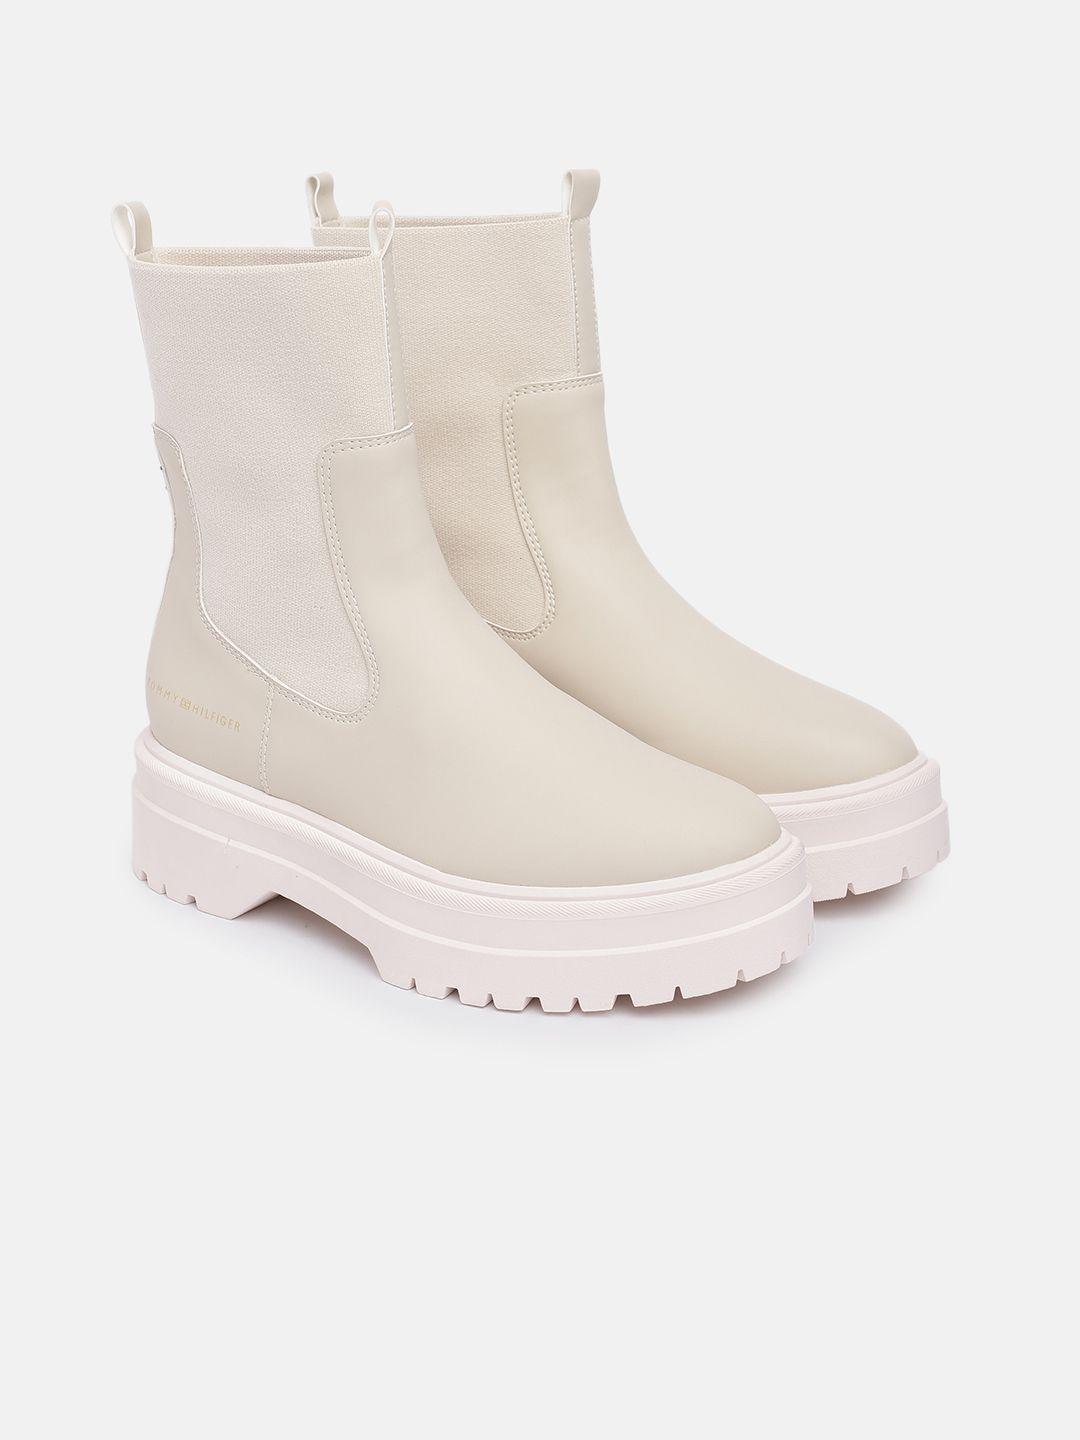 tommy-hilfiger-women-solid-high-top-platform-rainboot-style-chunky-boots